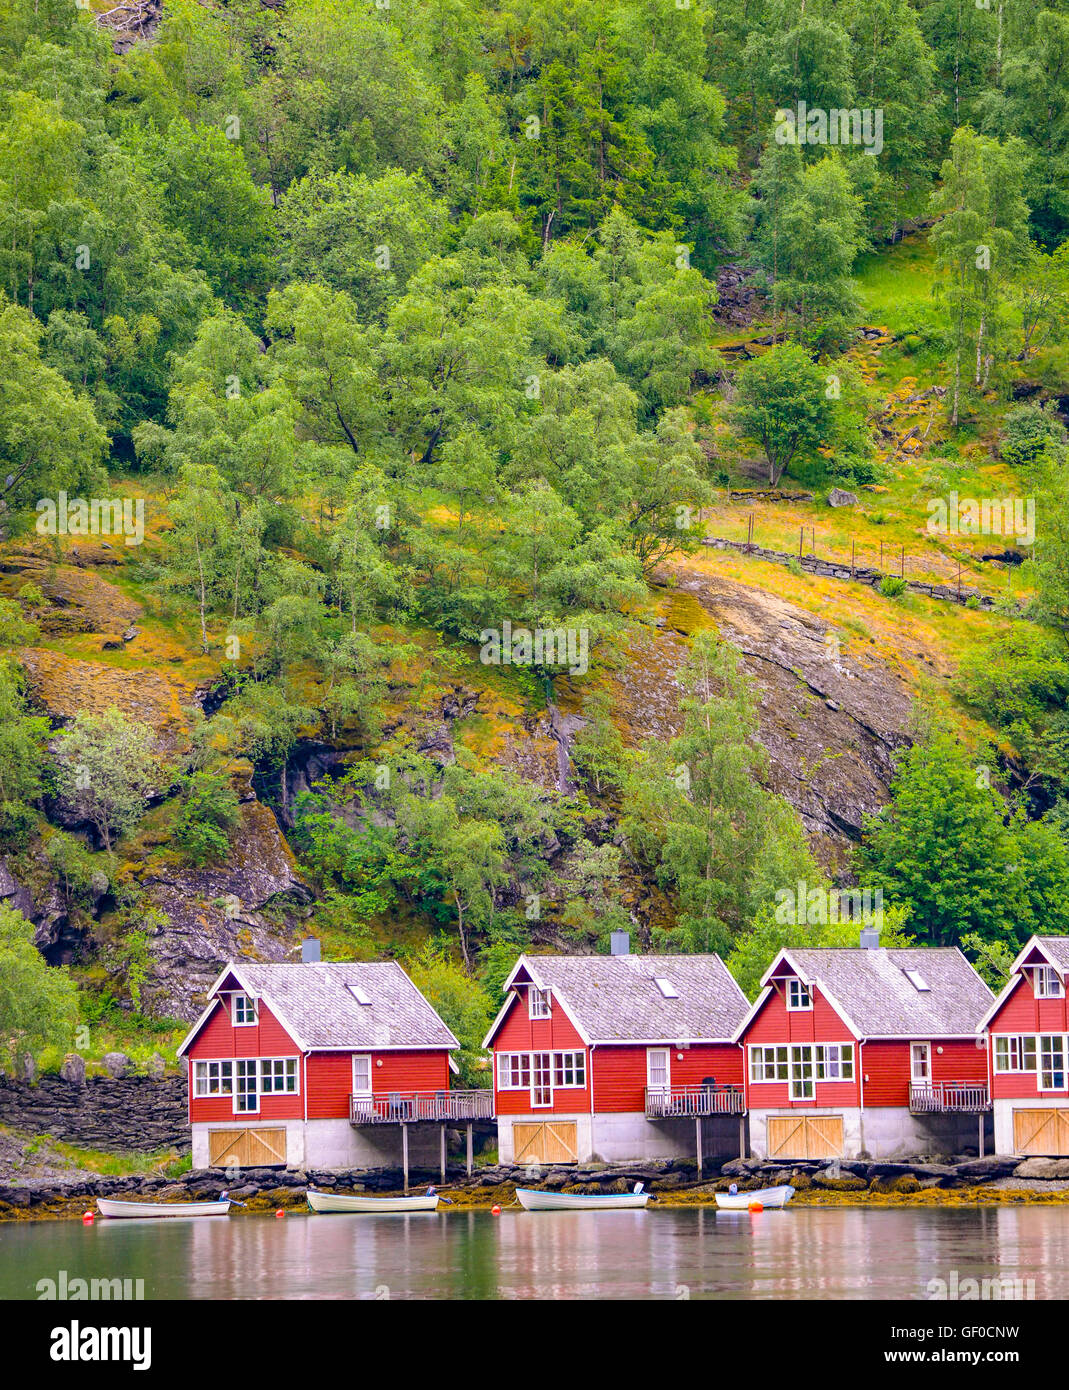 Fishermans huts and boats reflecting in Flam Harbour and Marina surrounded by mountain forest. Flam, Norway Stock Photo